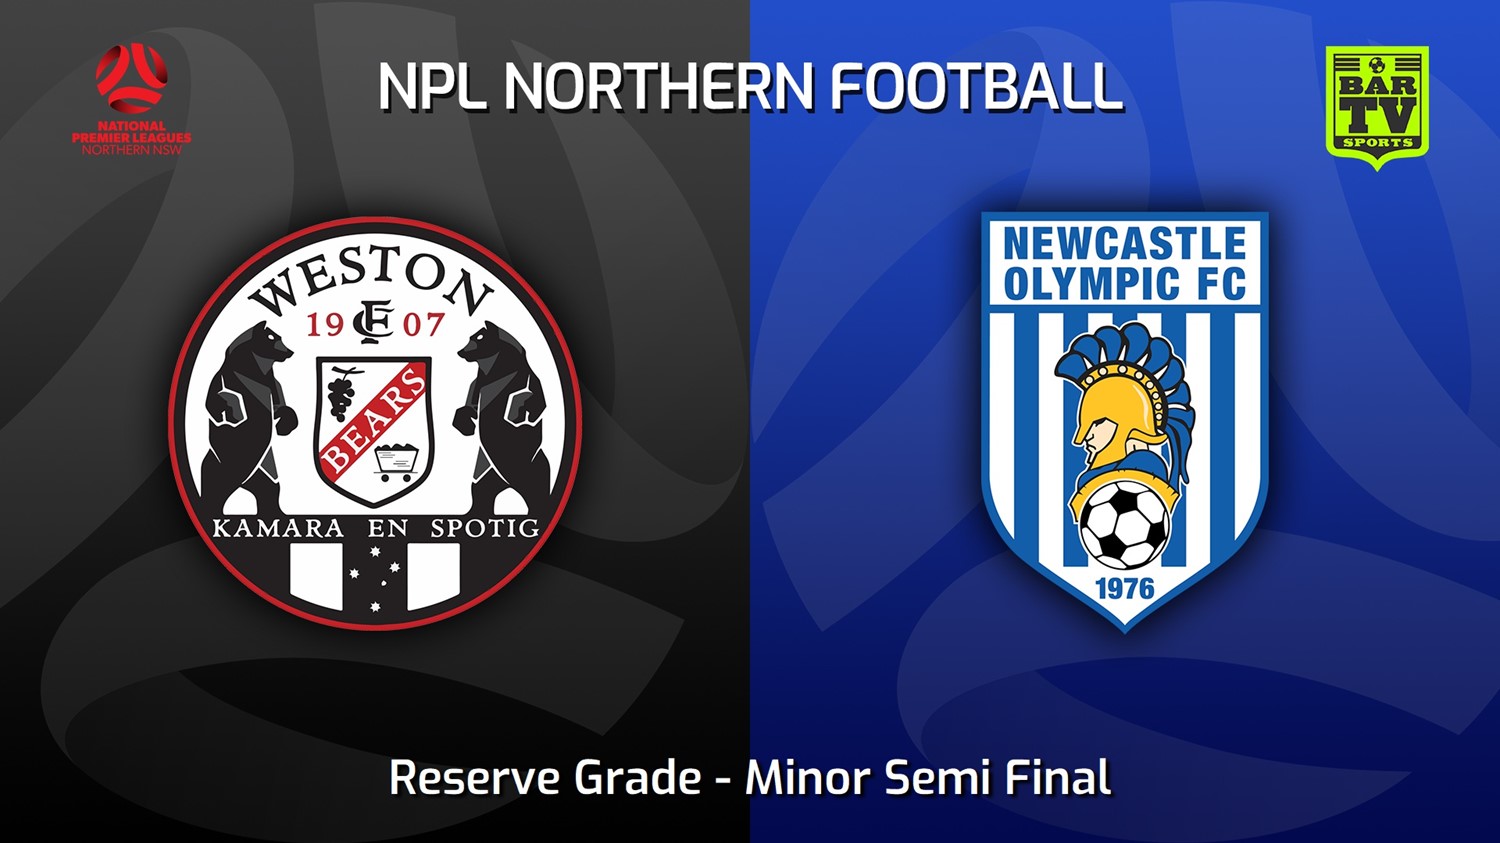 230826-NNSW NPLM Res Minor Semi Final - Weston Workers FC Res v Newcastle Olympic Res Minigame Slate Image